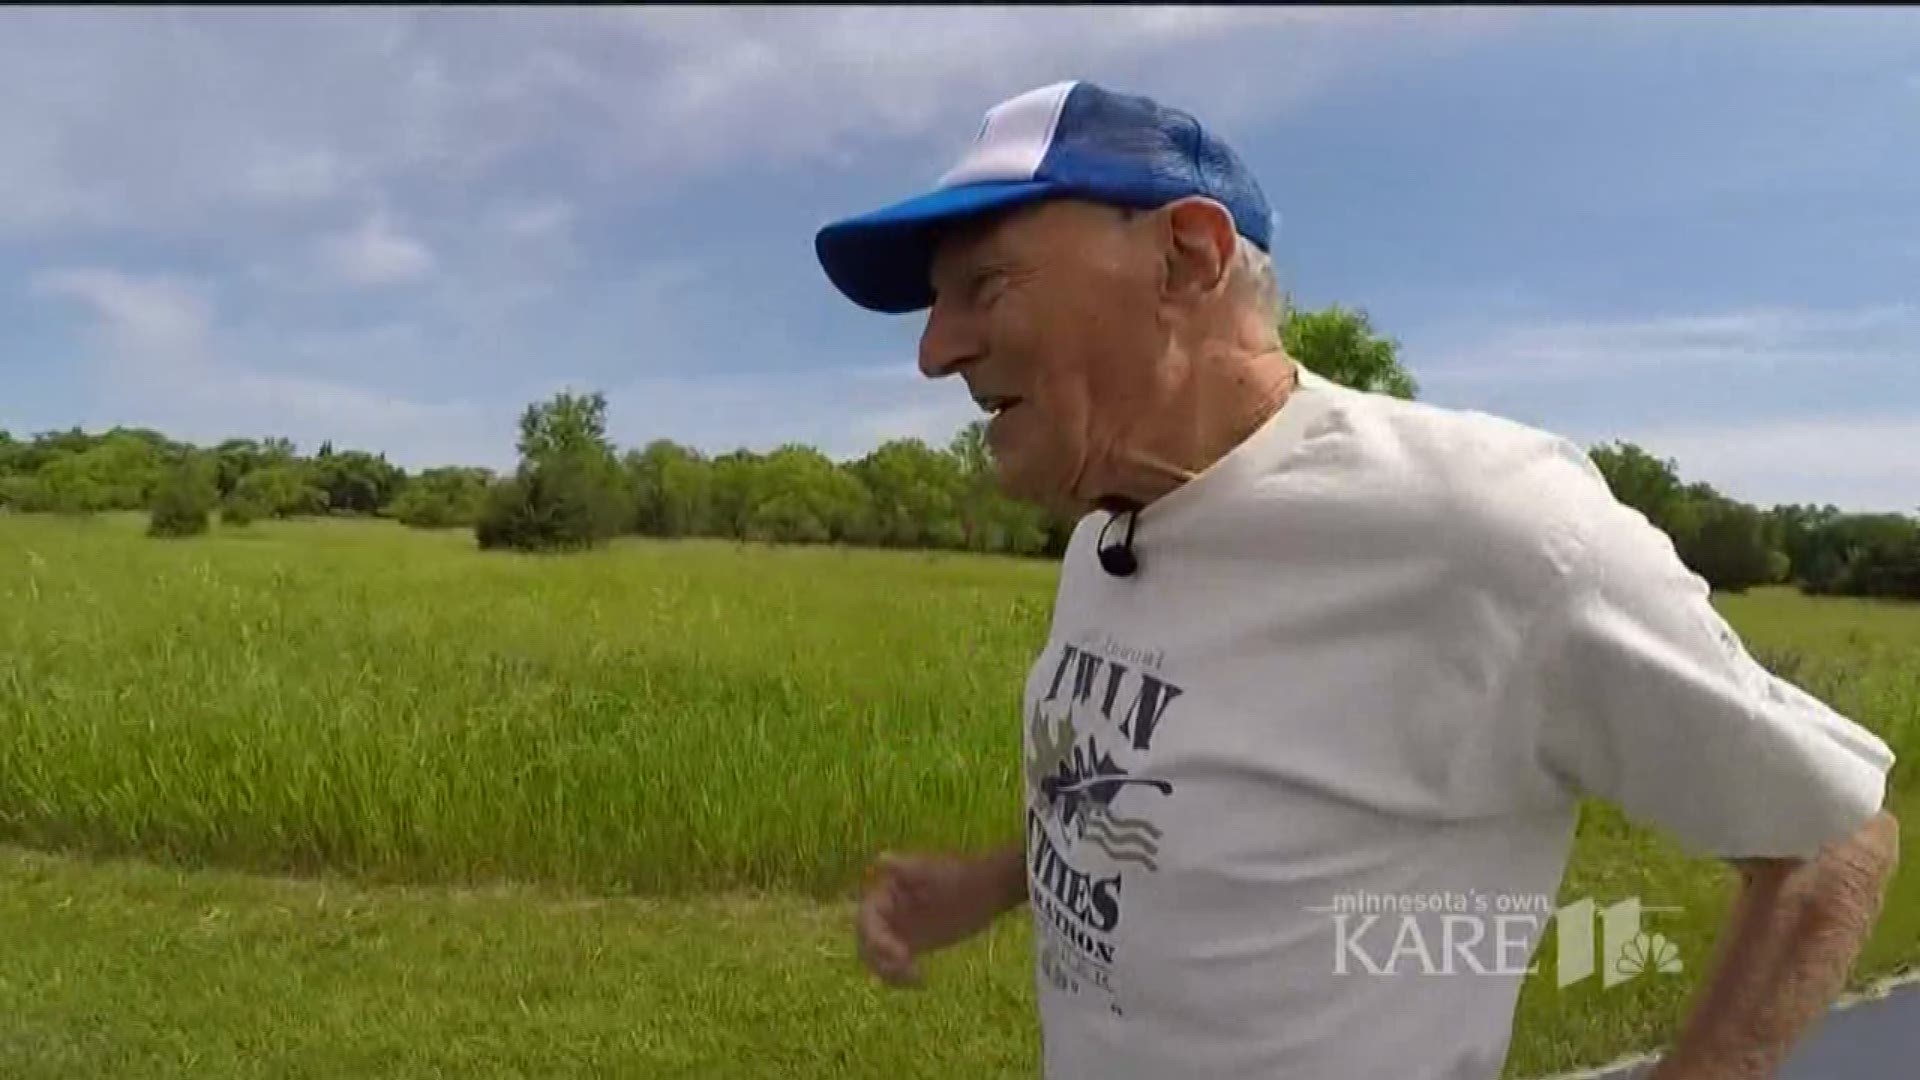 At 92, roughly four times a week Keston drives himself to the trail, then runs three to four miles, slowing periodically to catch his breath, before soldiering on. http://kare11.tv/2uGJoC2